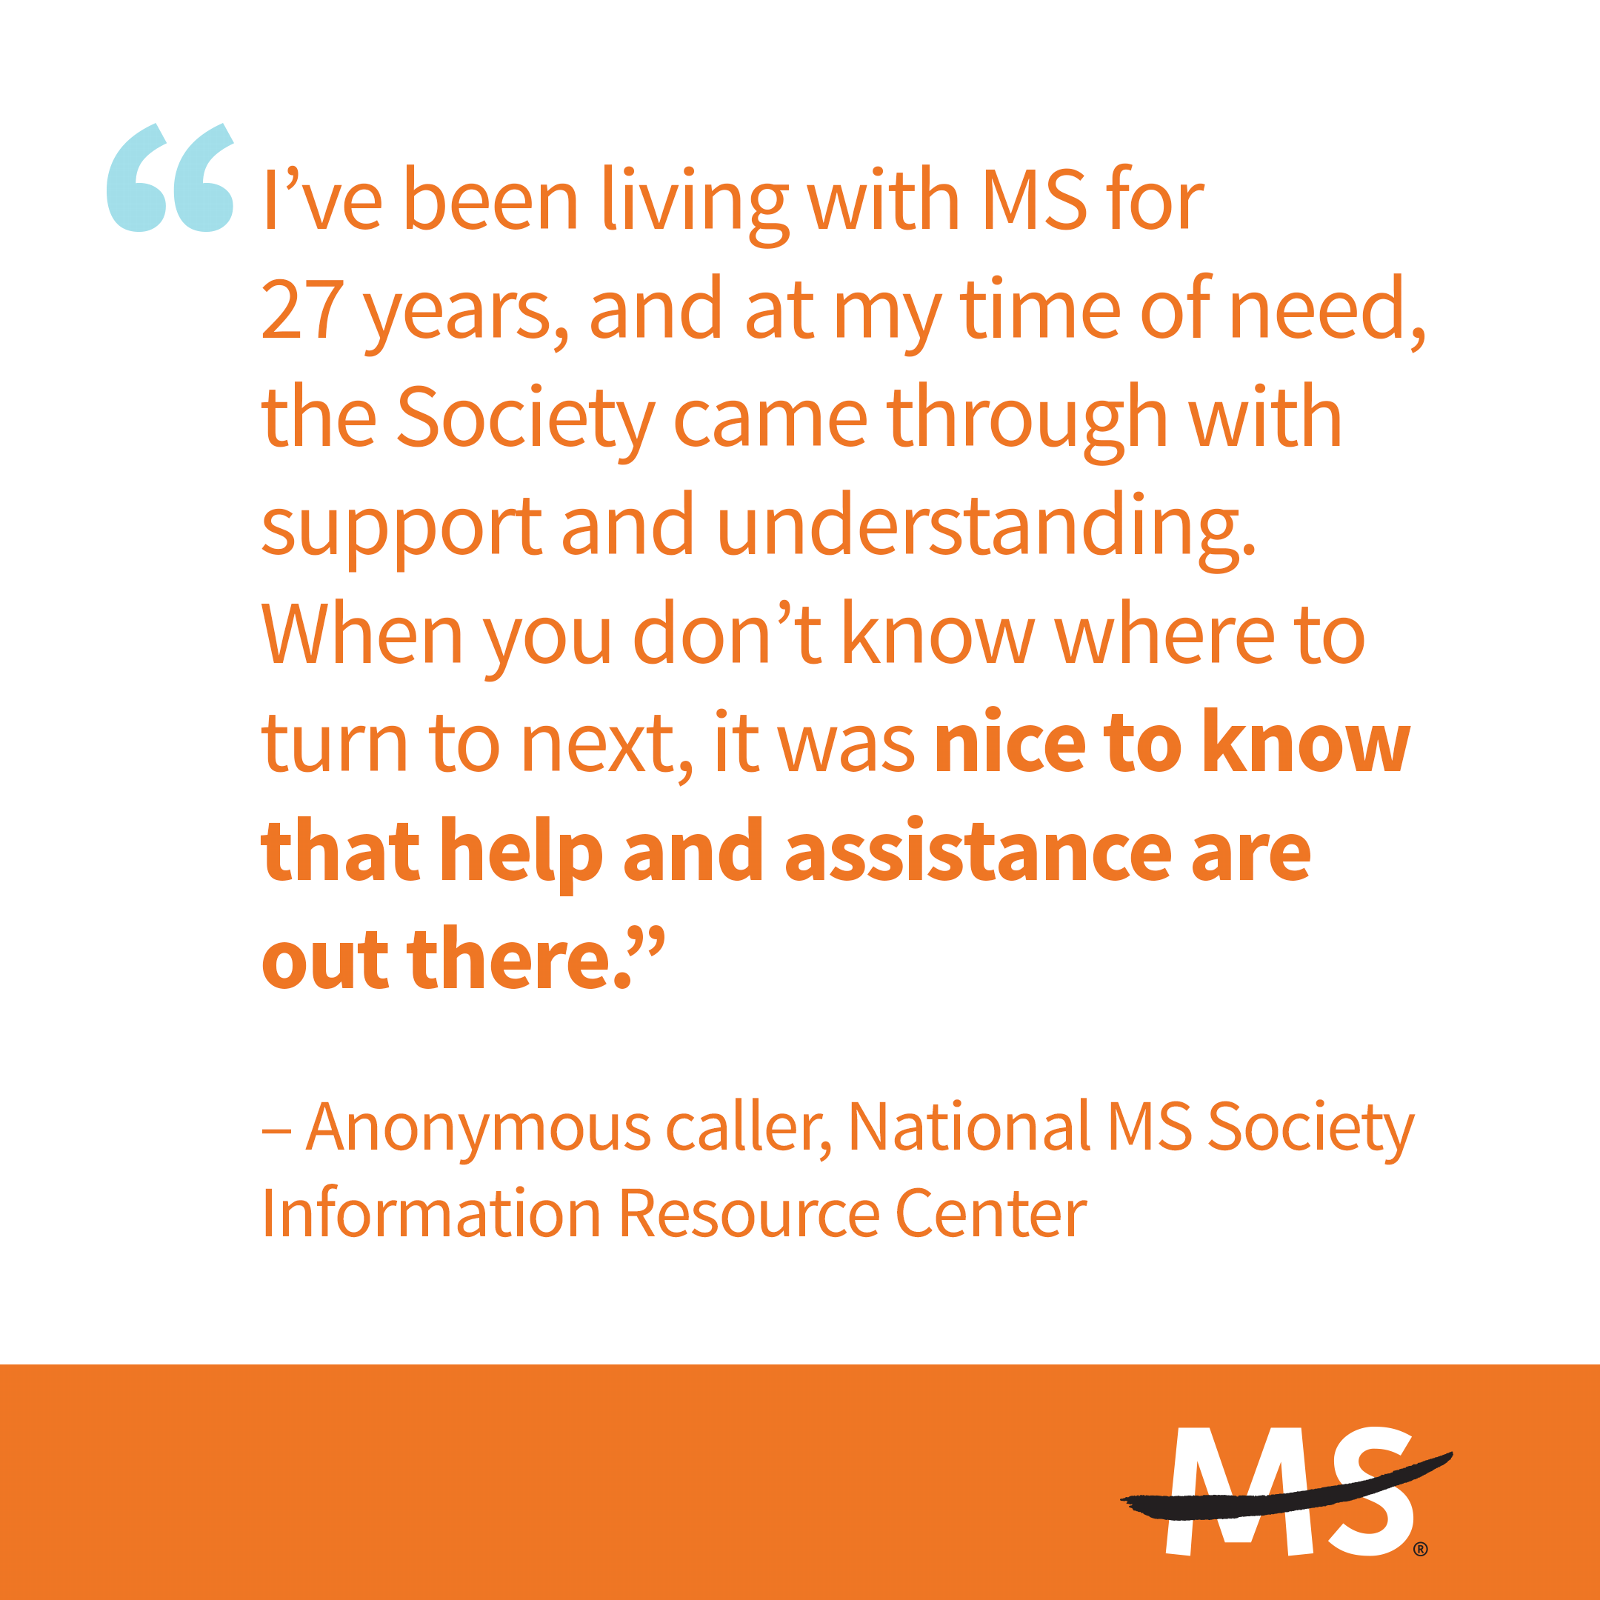 Quote from person living with MS for 27 years